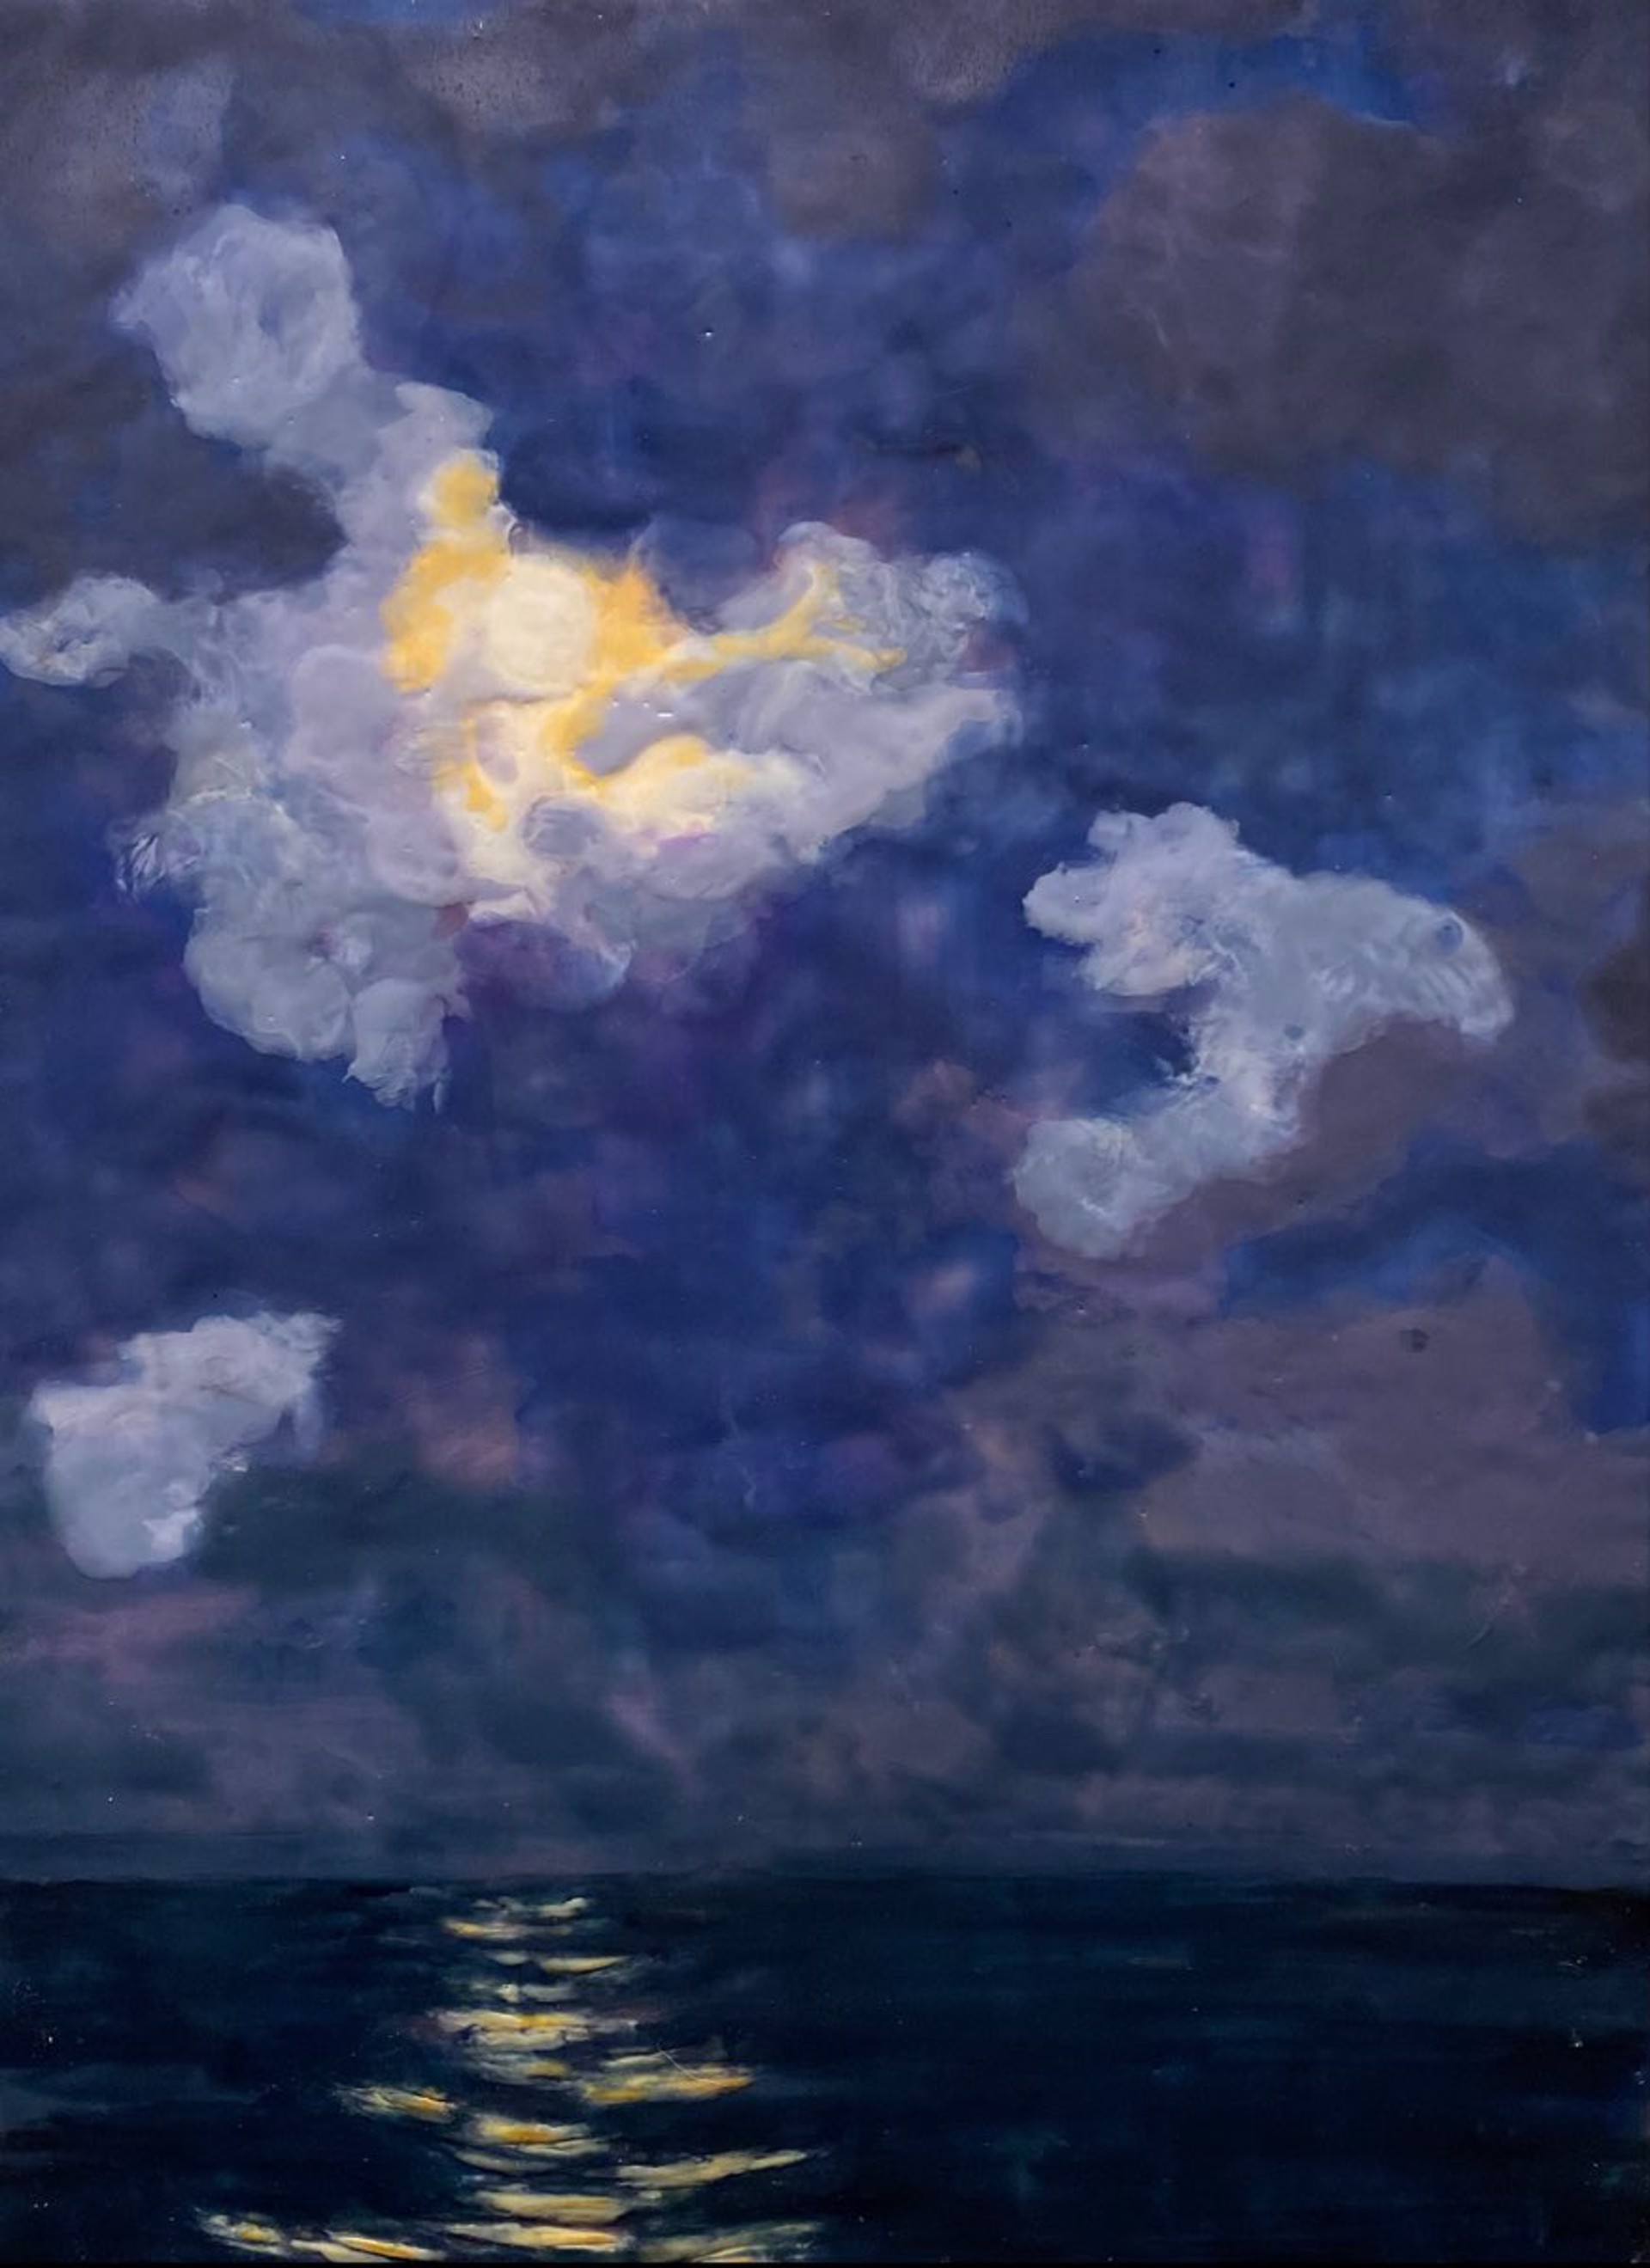 Moonlight on the Bay by Suzanne Damrich